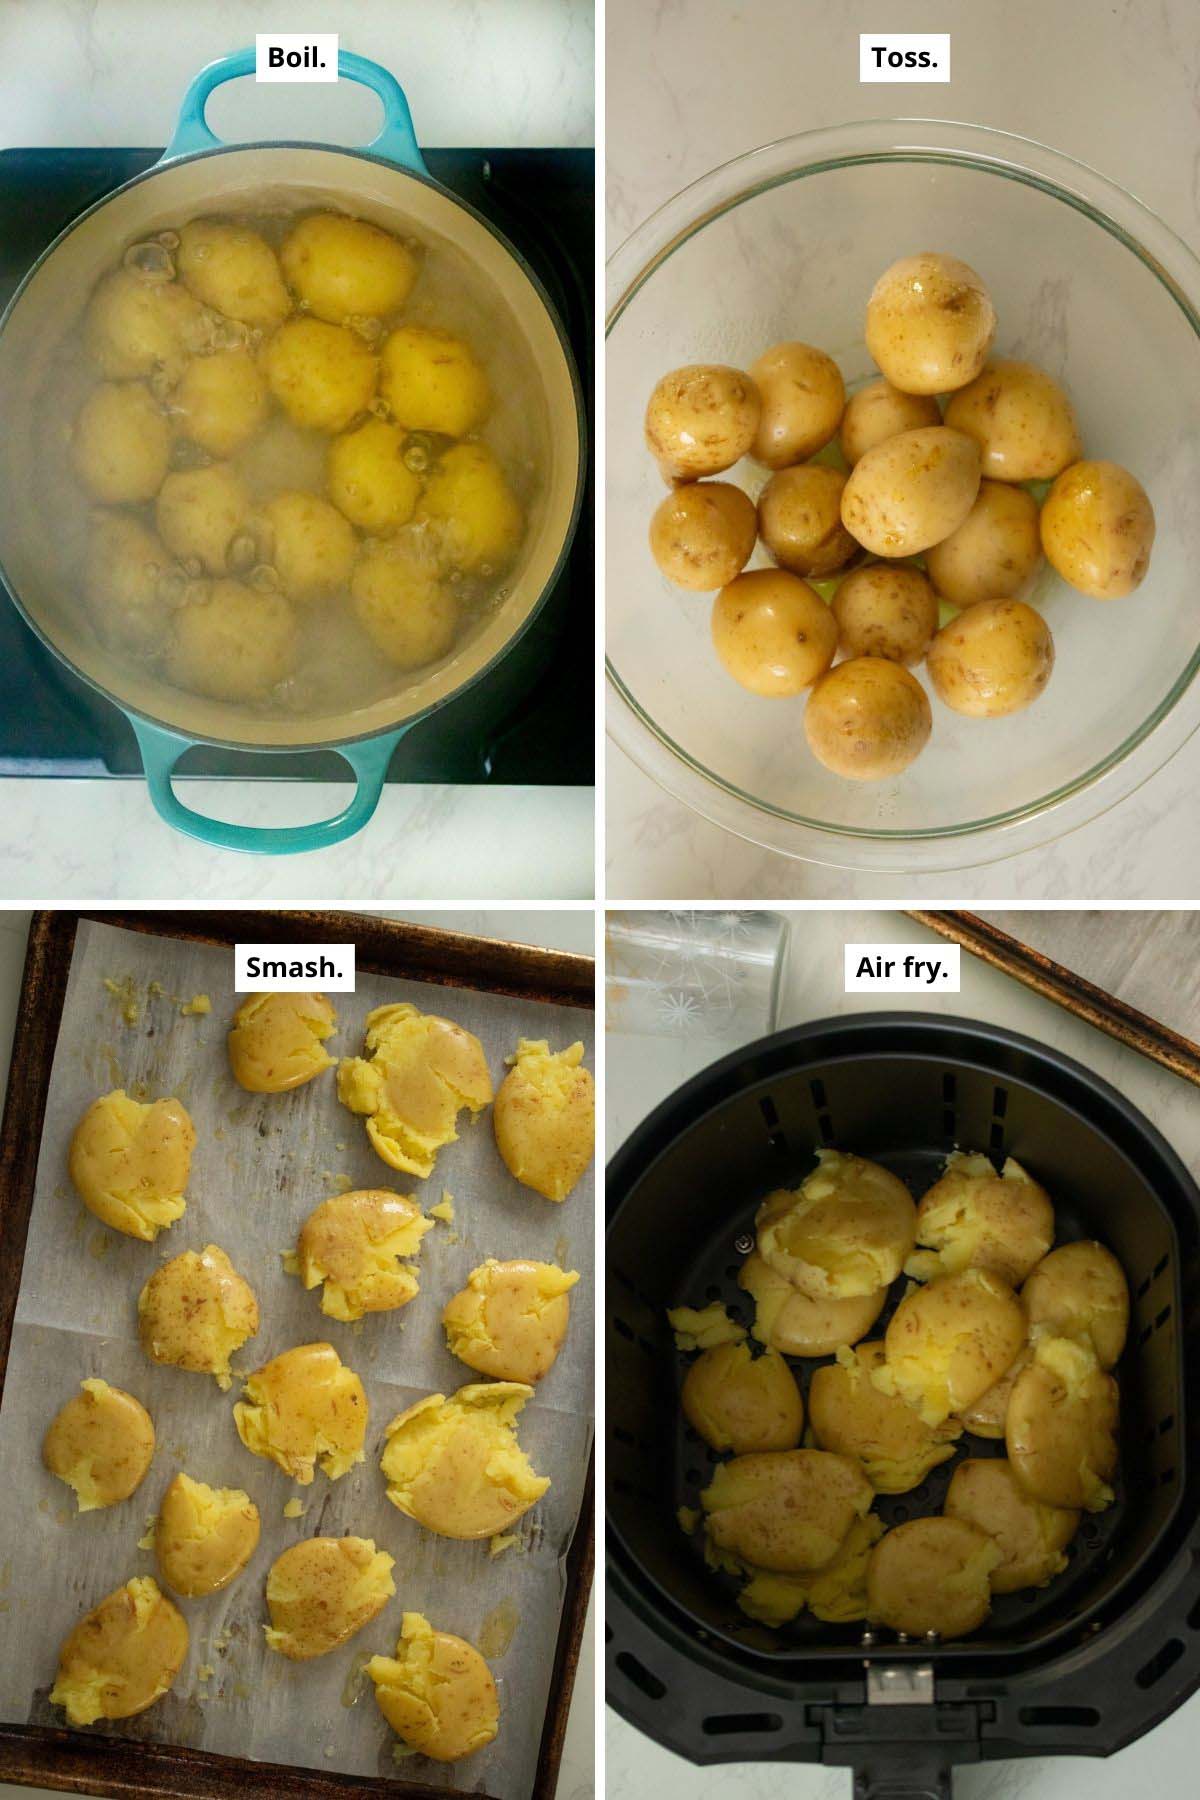 image collage showing boiling the potatoes; tossing with salt, oil, and vinegar; smashed, and in the air fryer before cooking